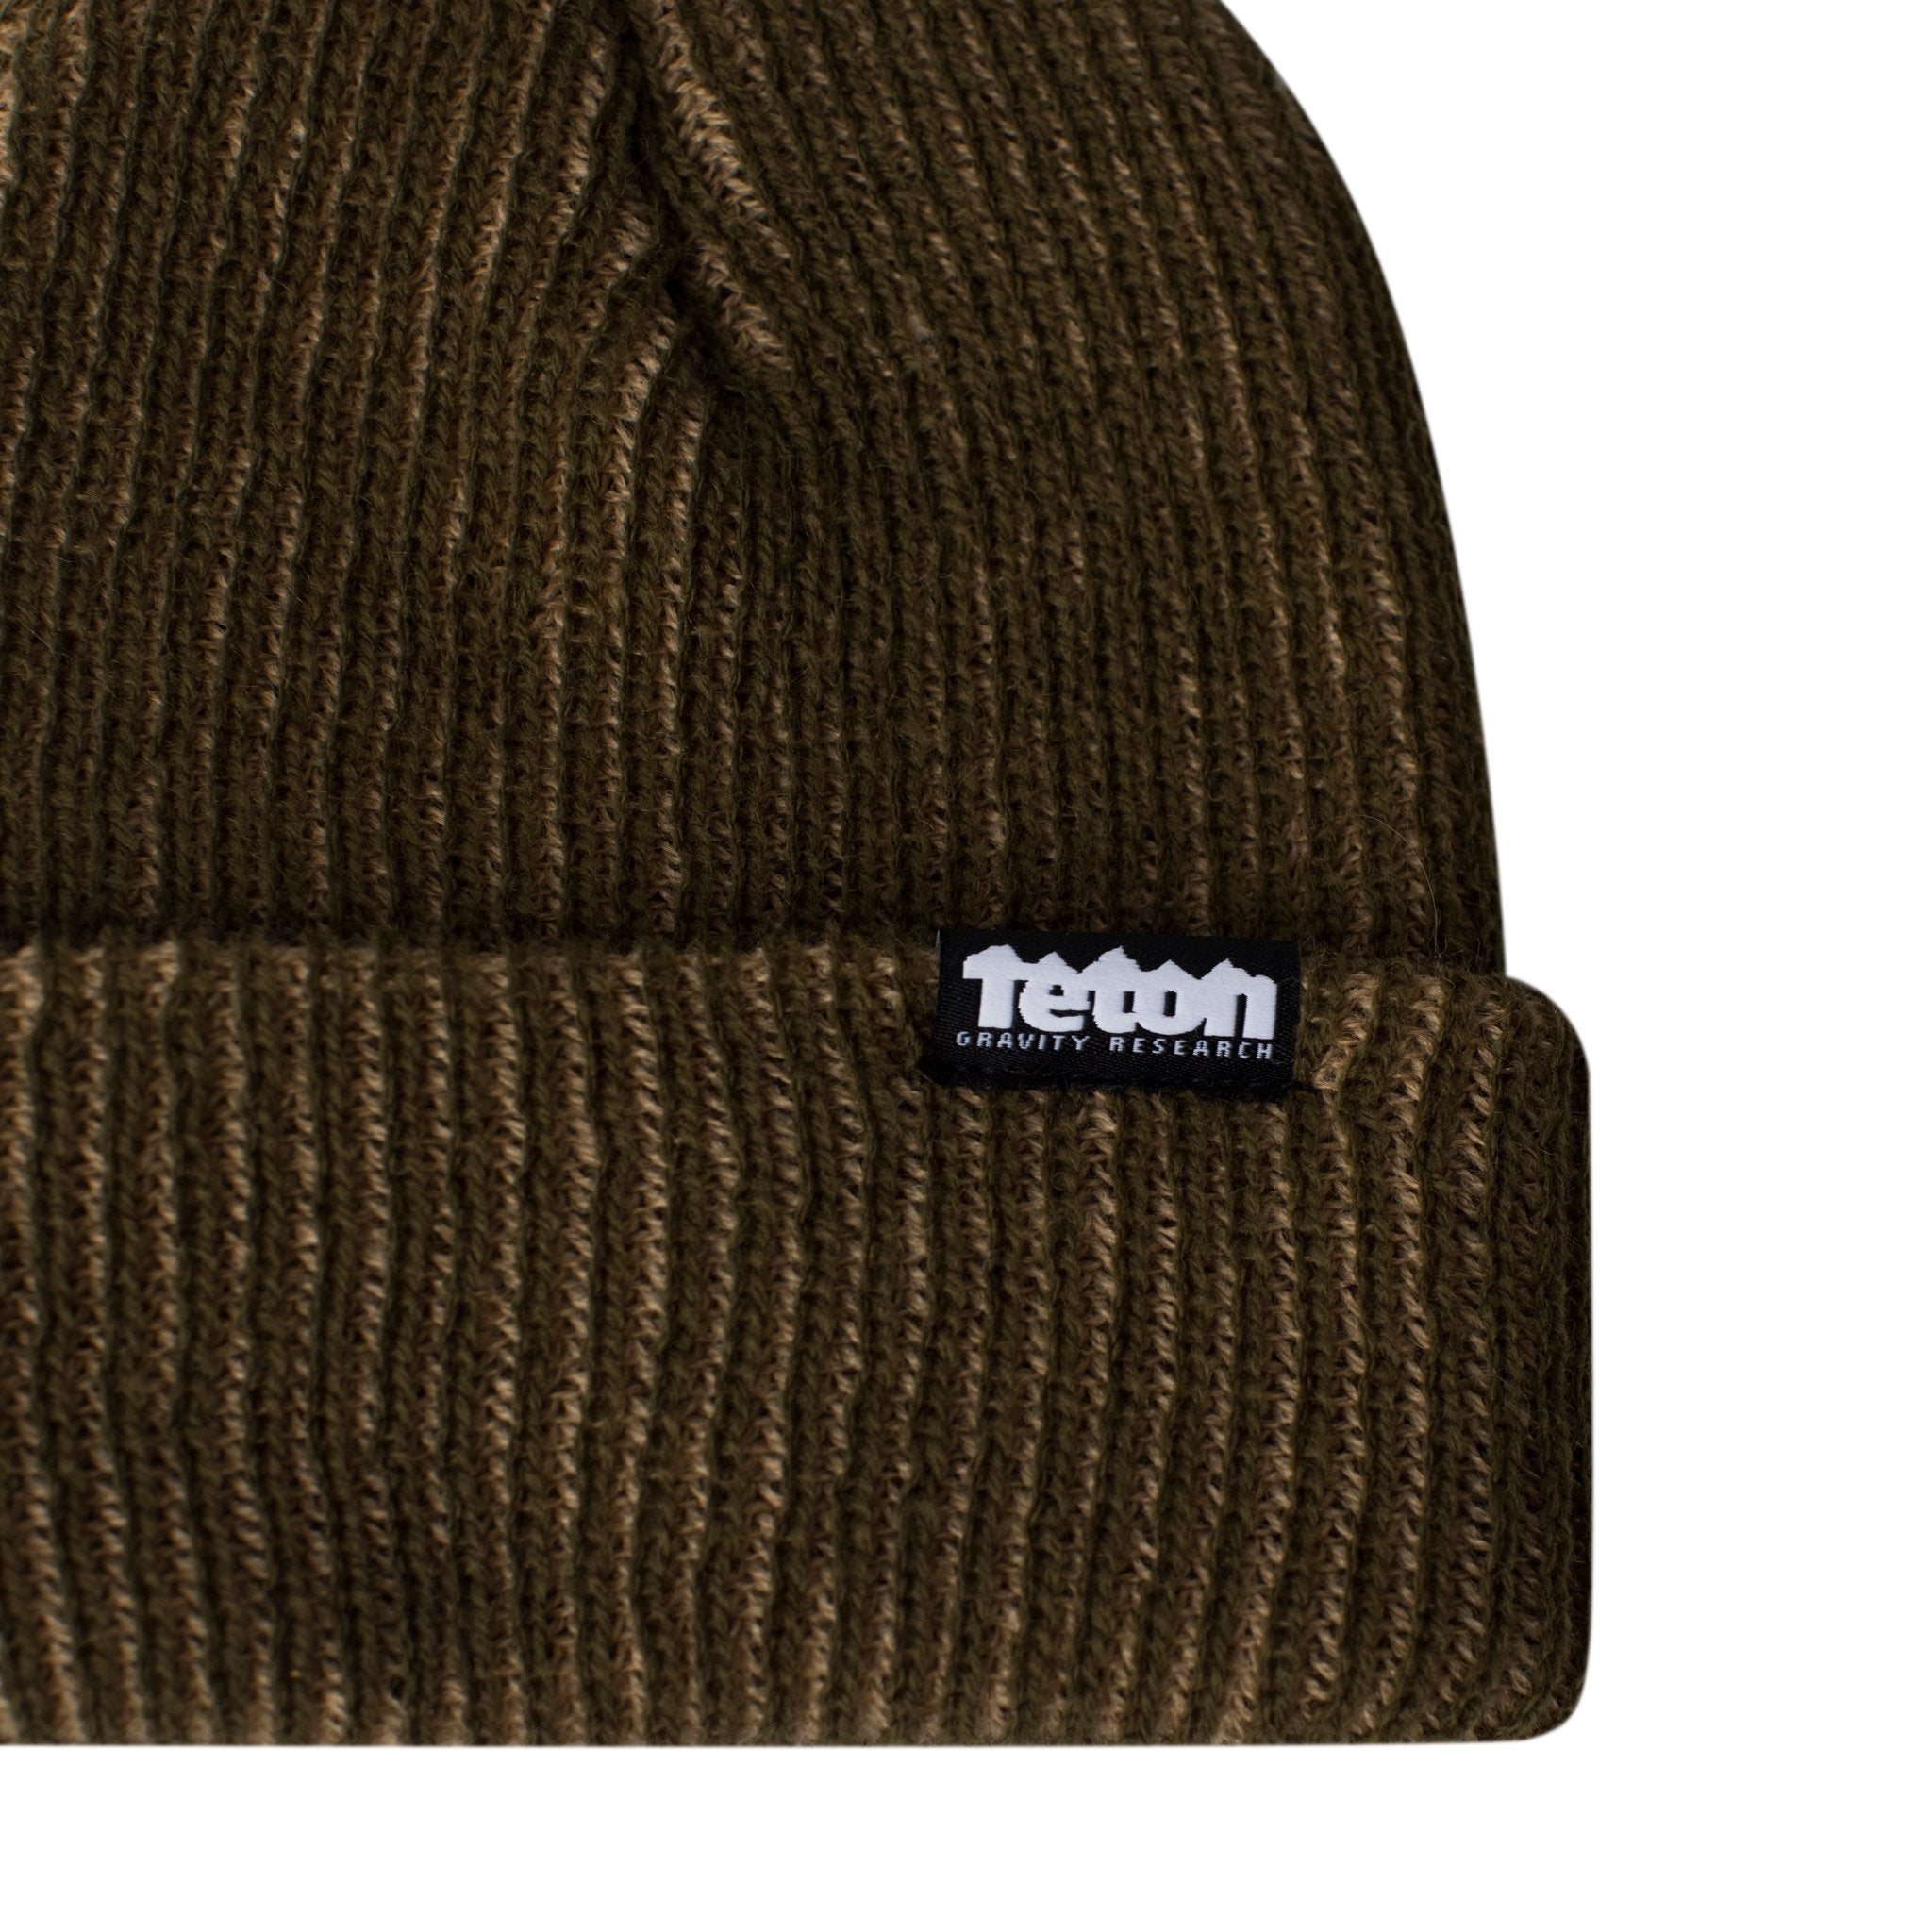 Vertical Stripe Watch Beanie - Teton Gravity Research #color_olive